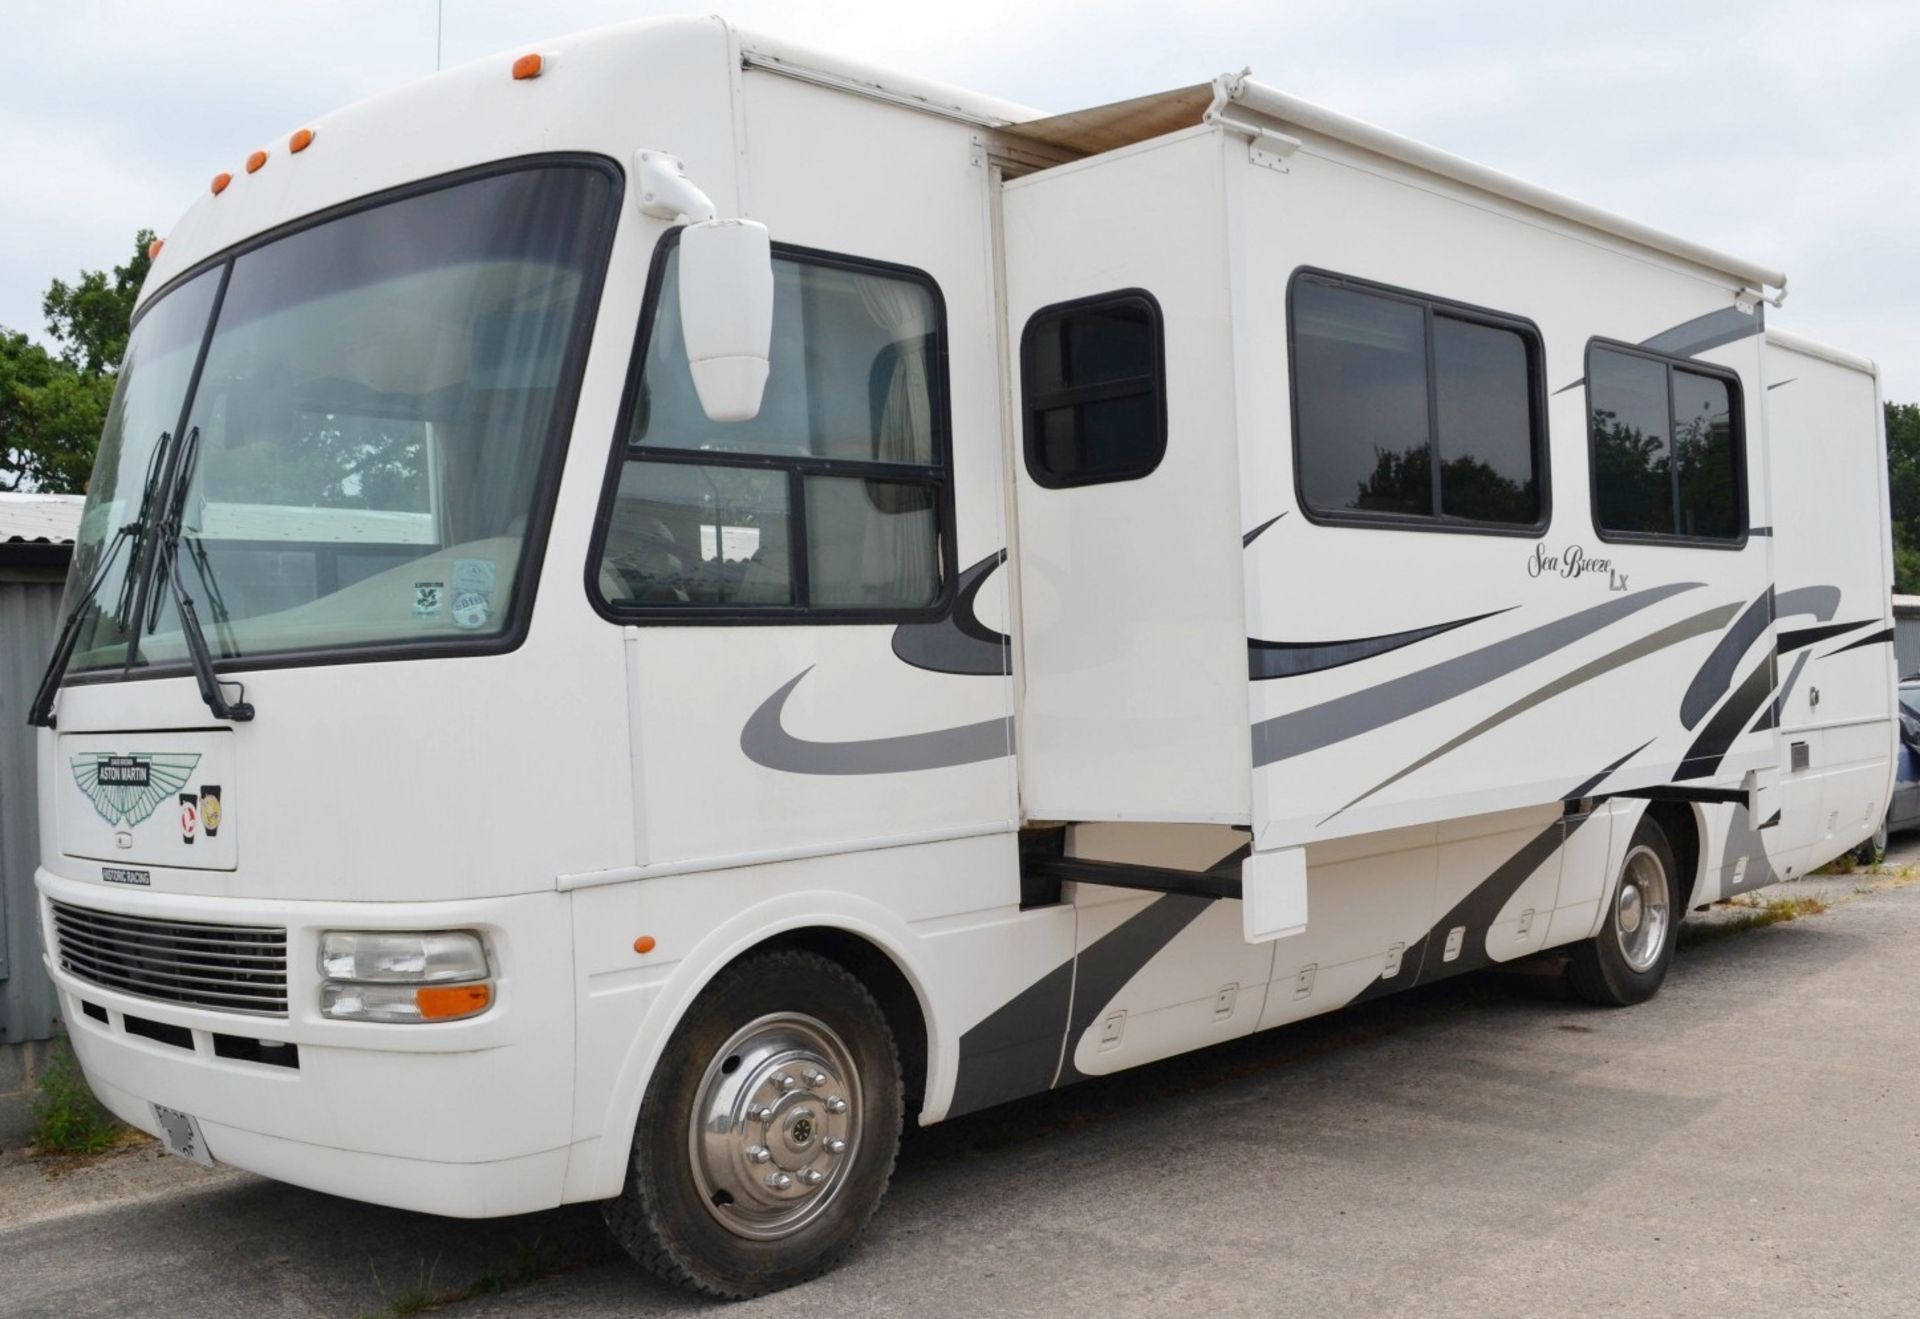 1 x 2005 National Sea Breeze LX 8321 Workhorse Class A RV Motorhome With Two Power Slide Outs